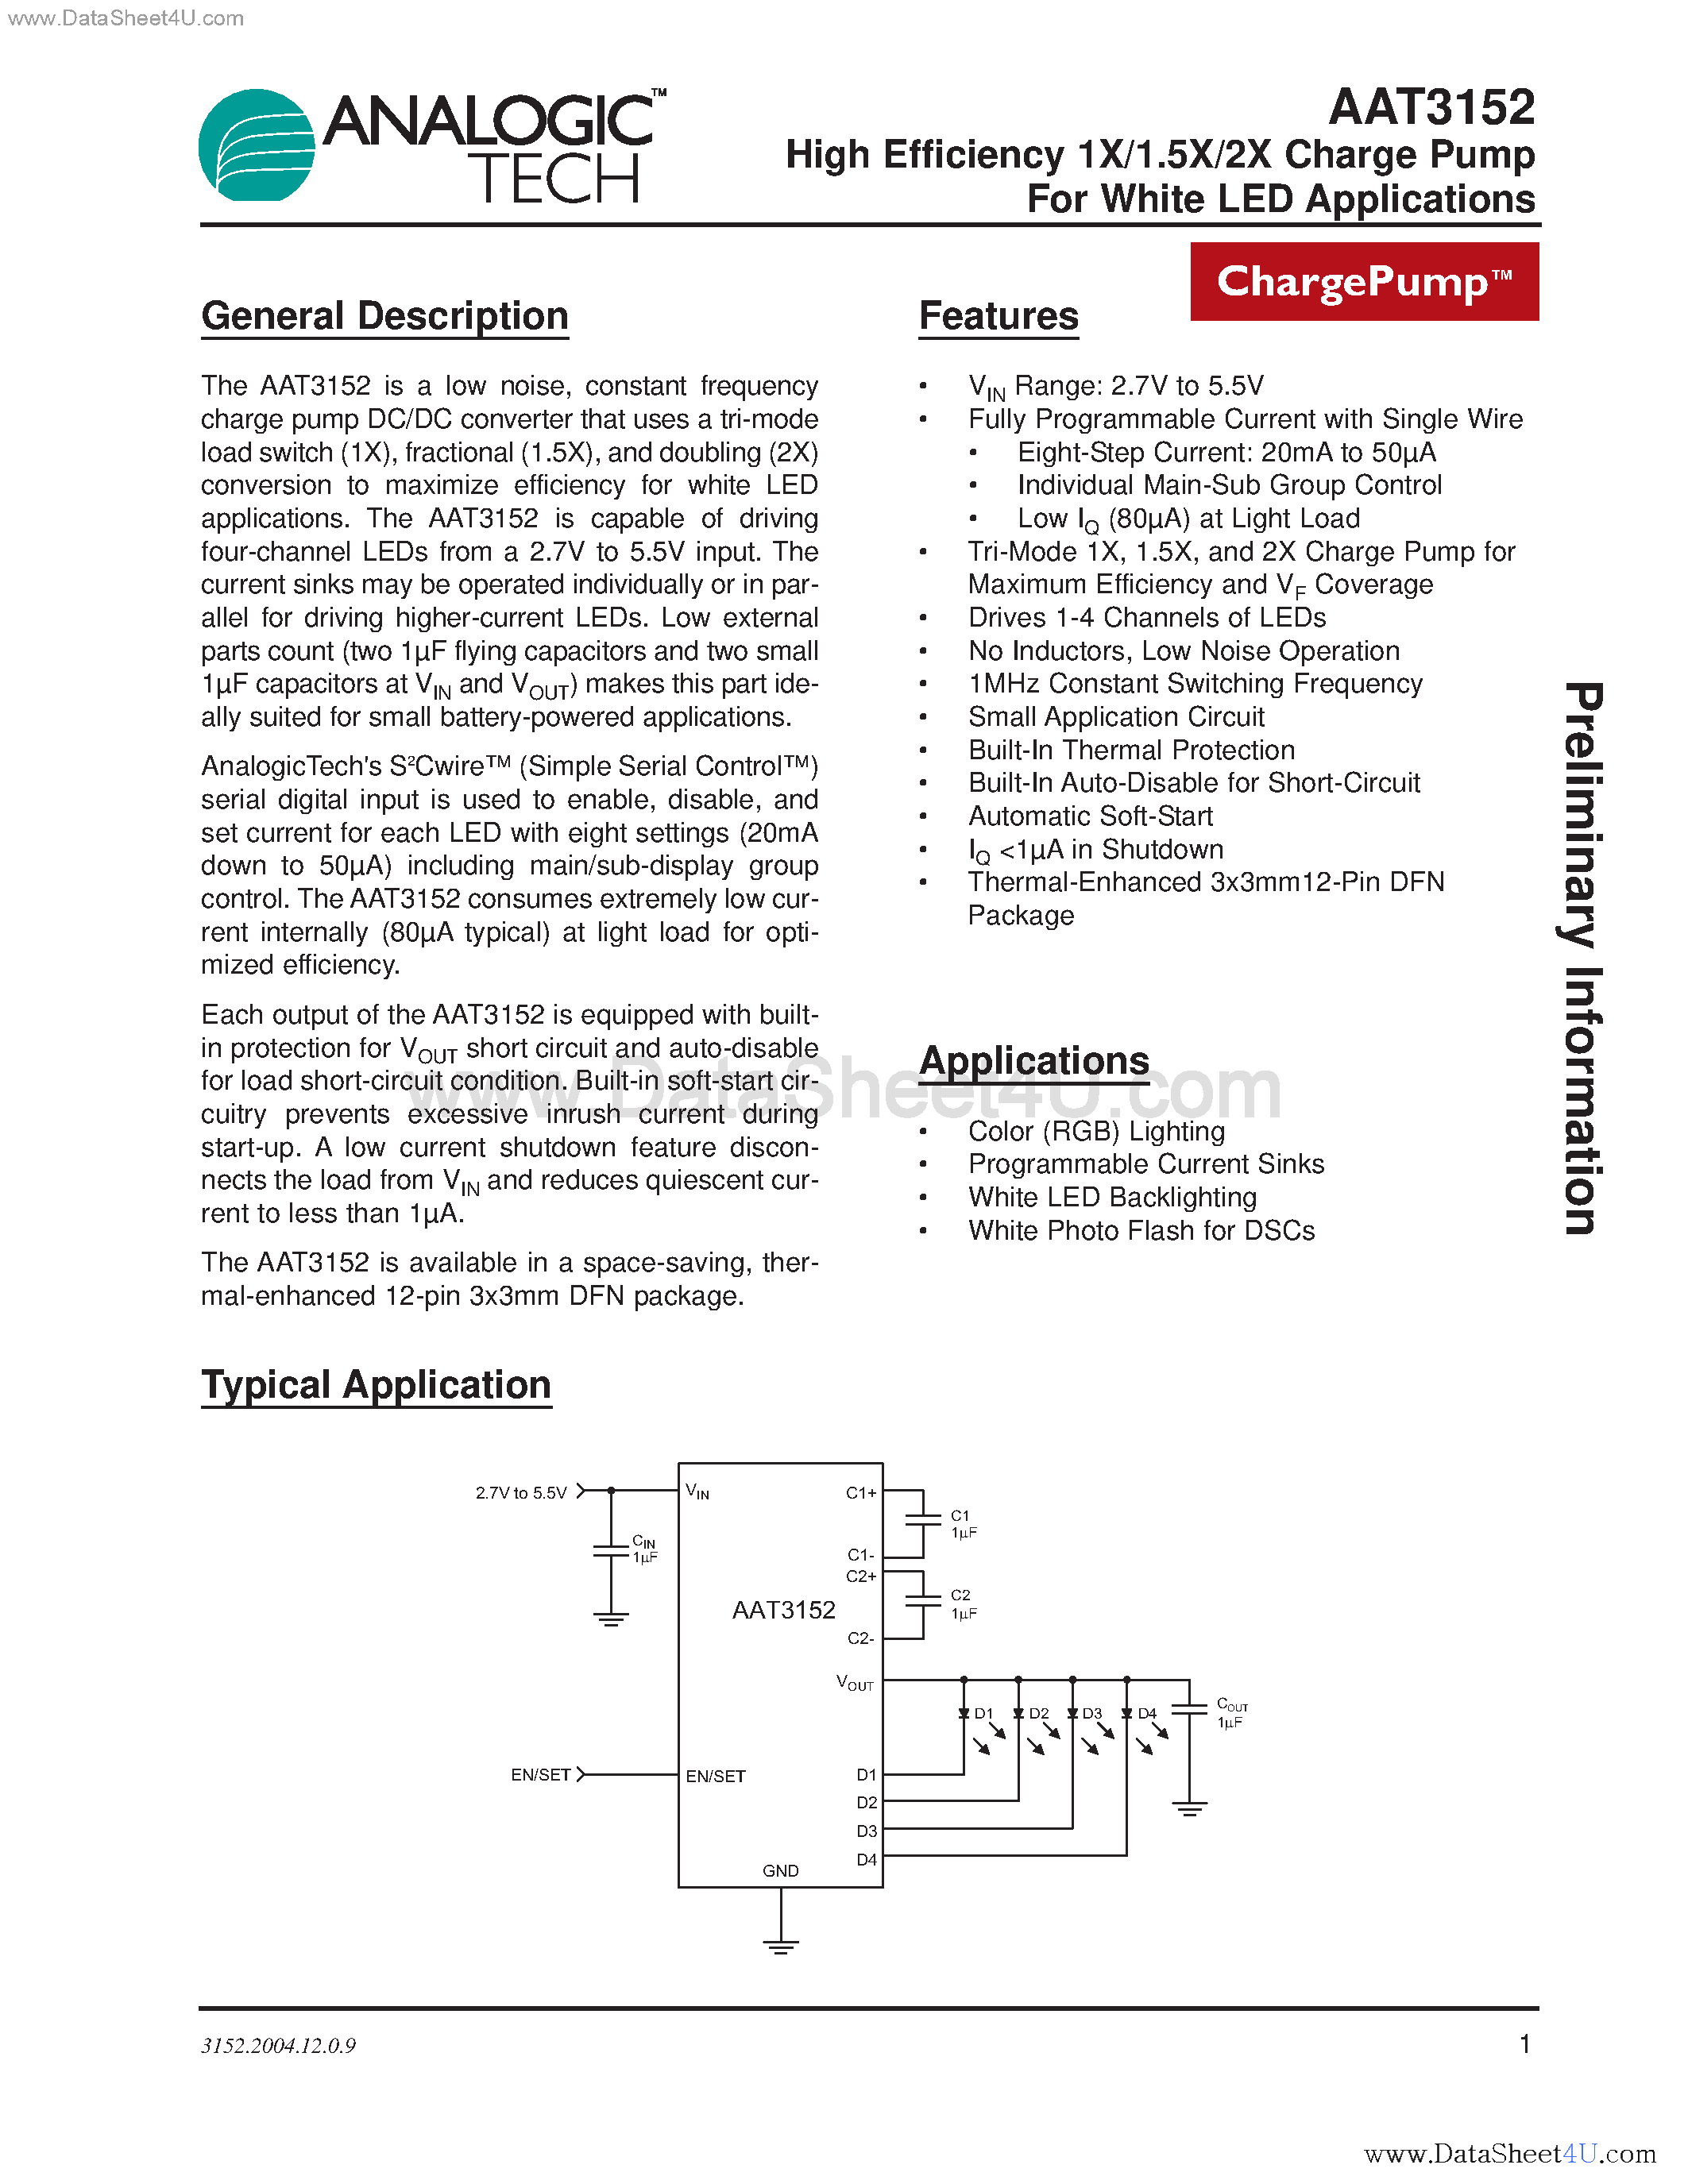 Datasheet AAT3152 - High Efficiency 1X/1.5X/2X Charge Pump For White LED Applications page 1